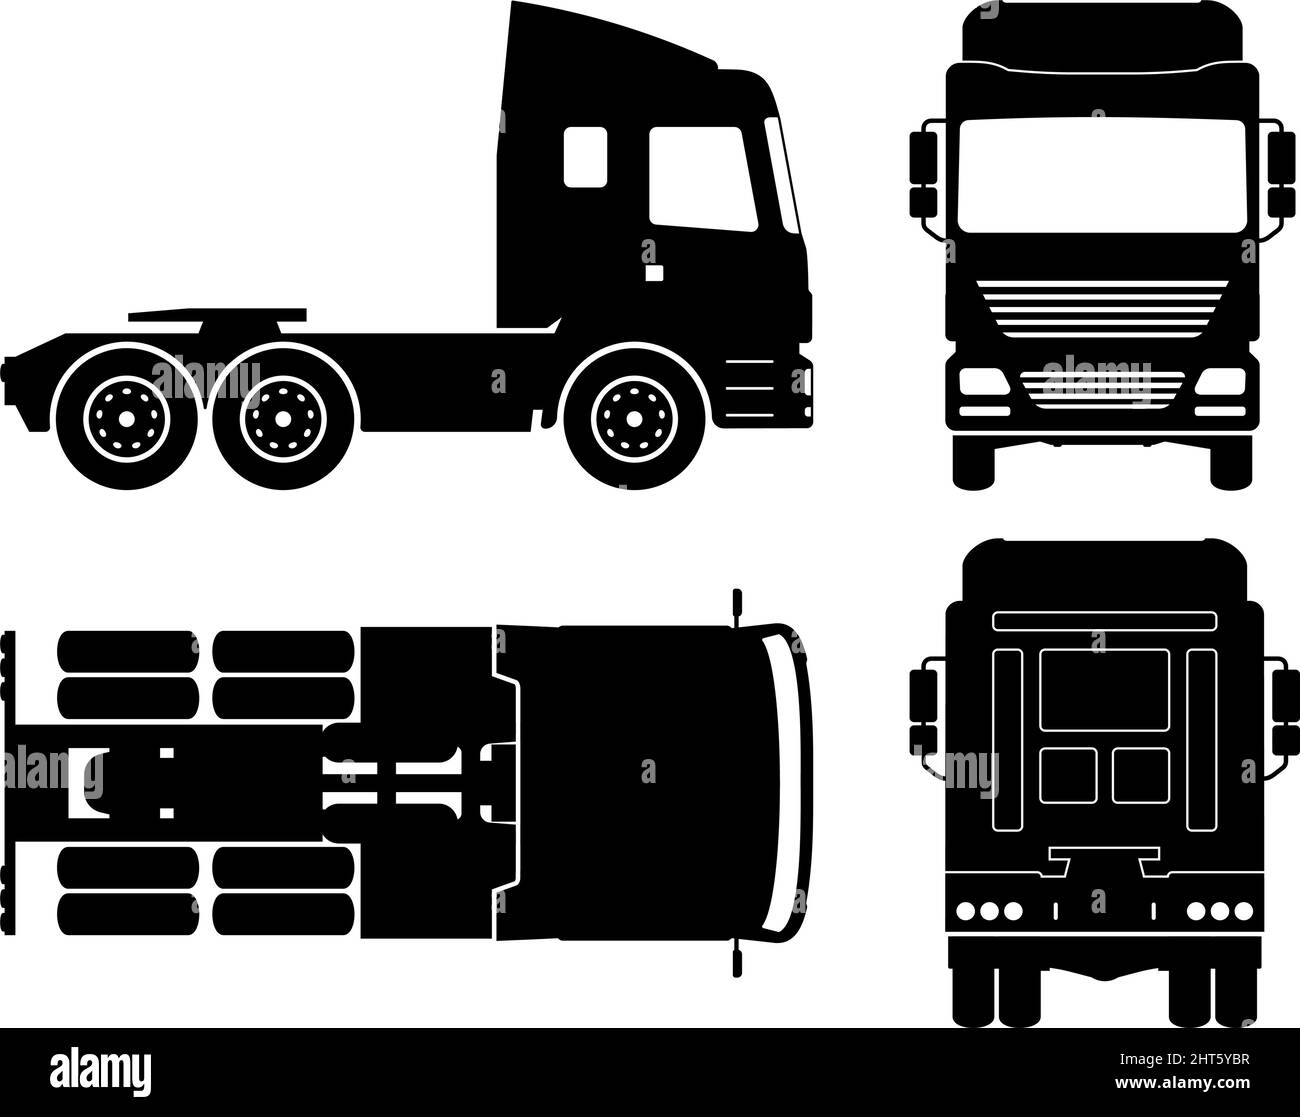 Truck silhouette on white background. Vehicle monochrome icons set view from side, front, back, and top Stock Vector